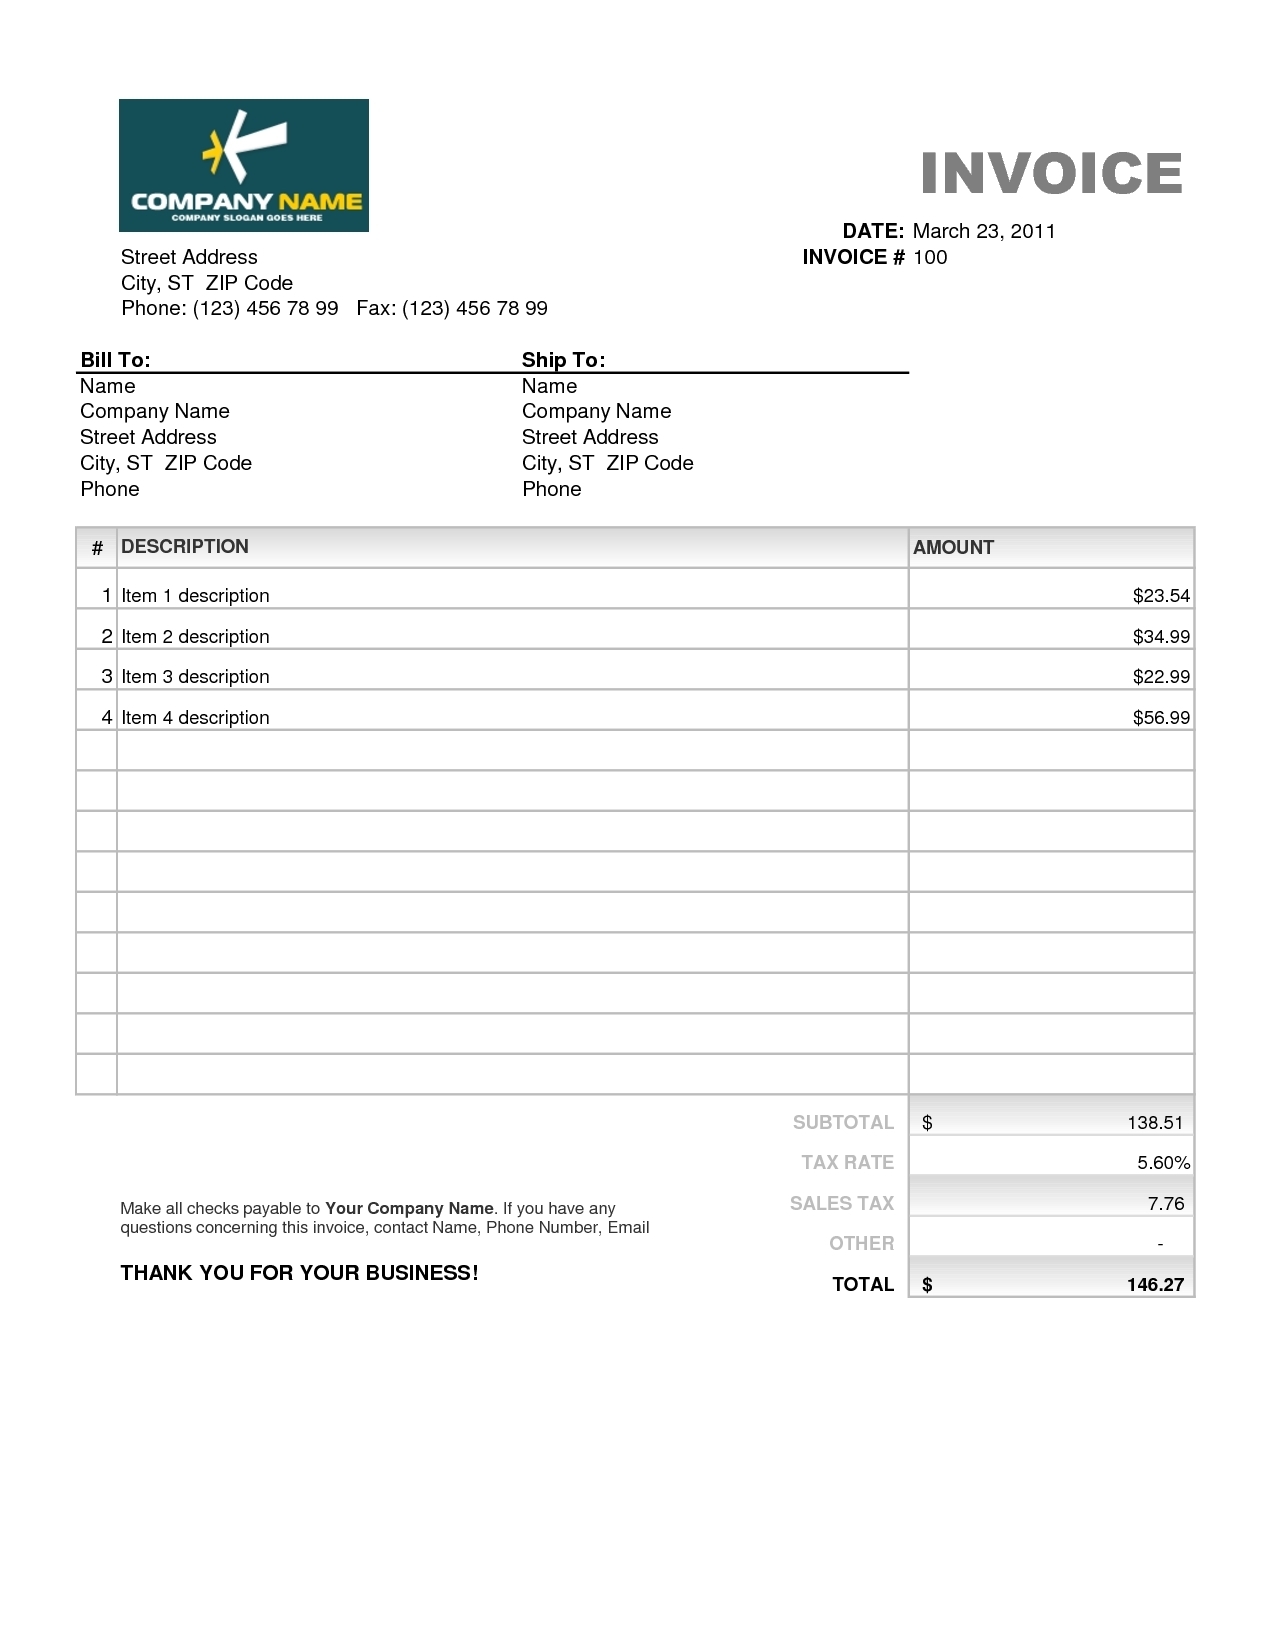 pages invoice templates invoice template free 2016 pages invoice template